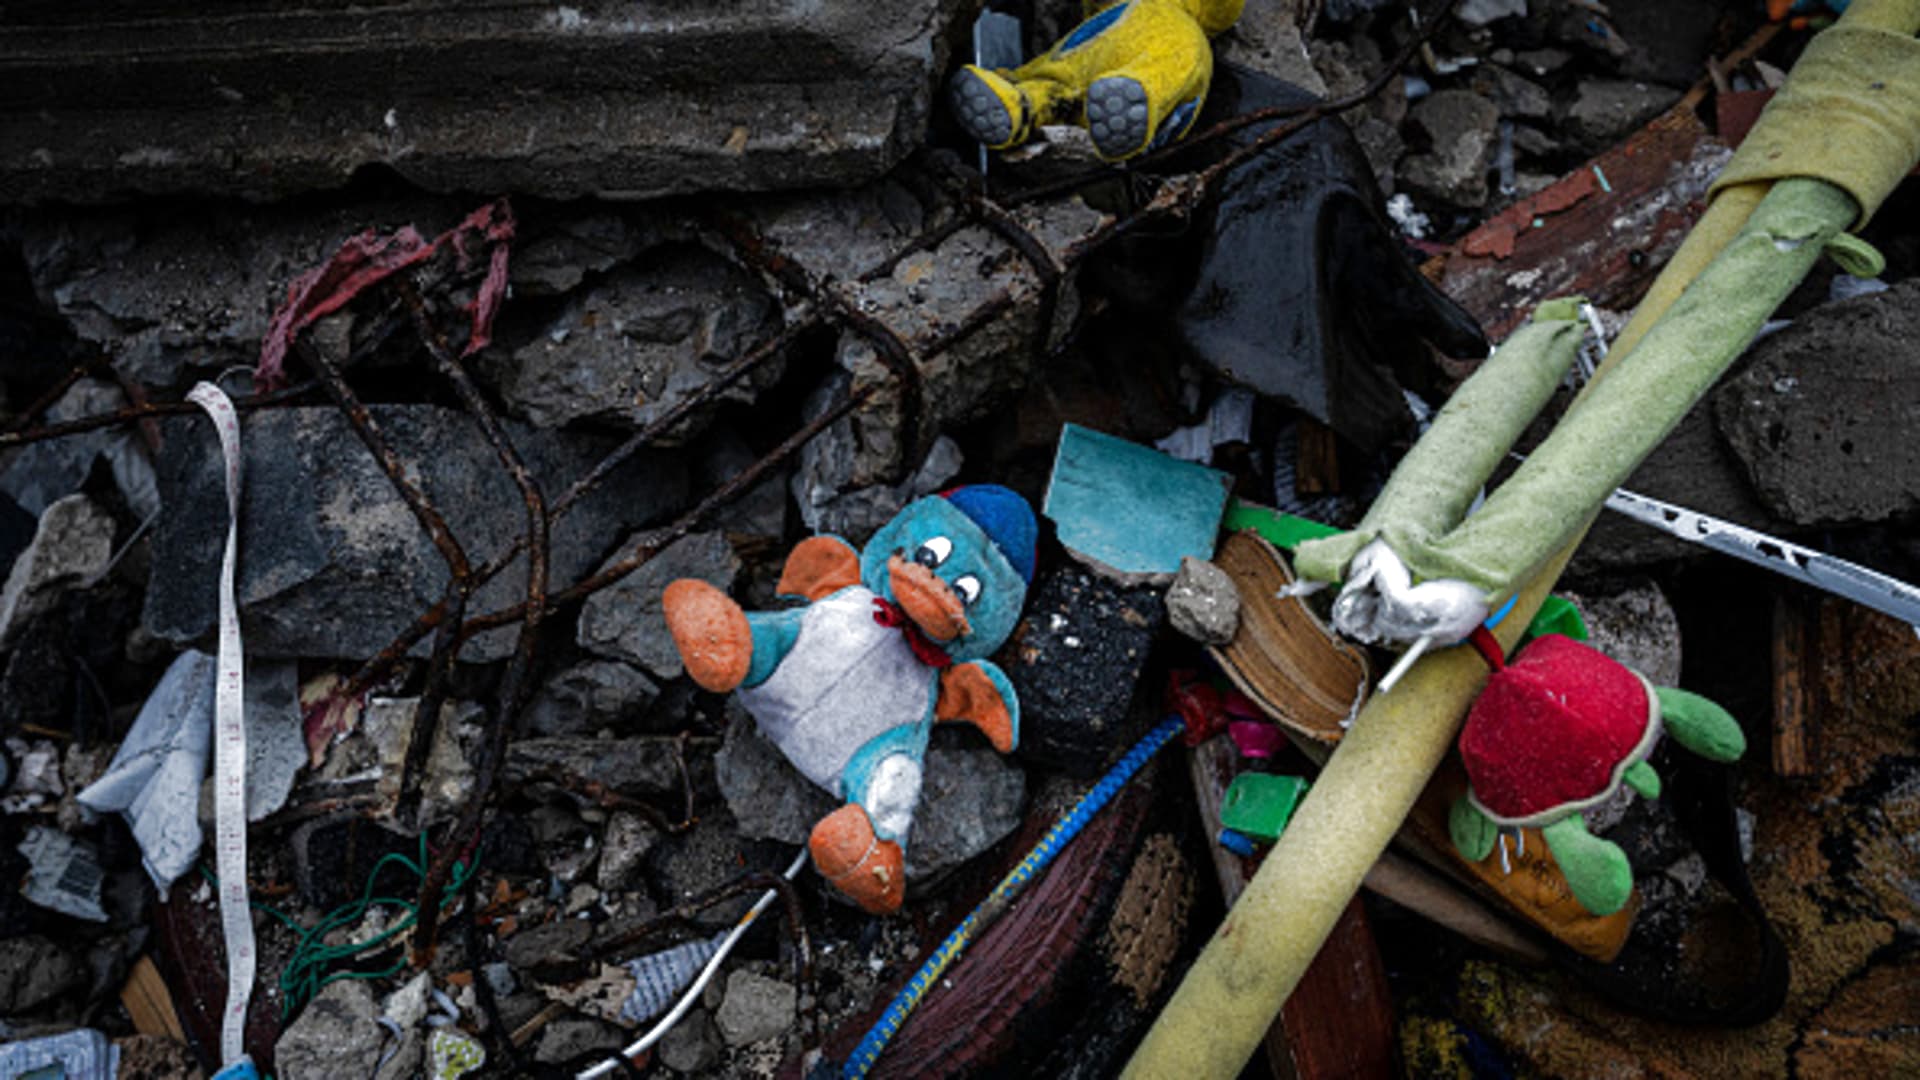 Toys and personal belongings are seen in the damaged building after Russian rocket attack as military mobility continues within the Russian-Ukrainian war in Kramatorsk, Ukraine on February 28, 2023.